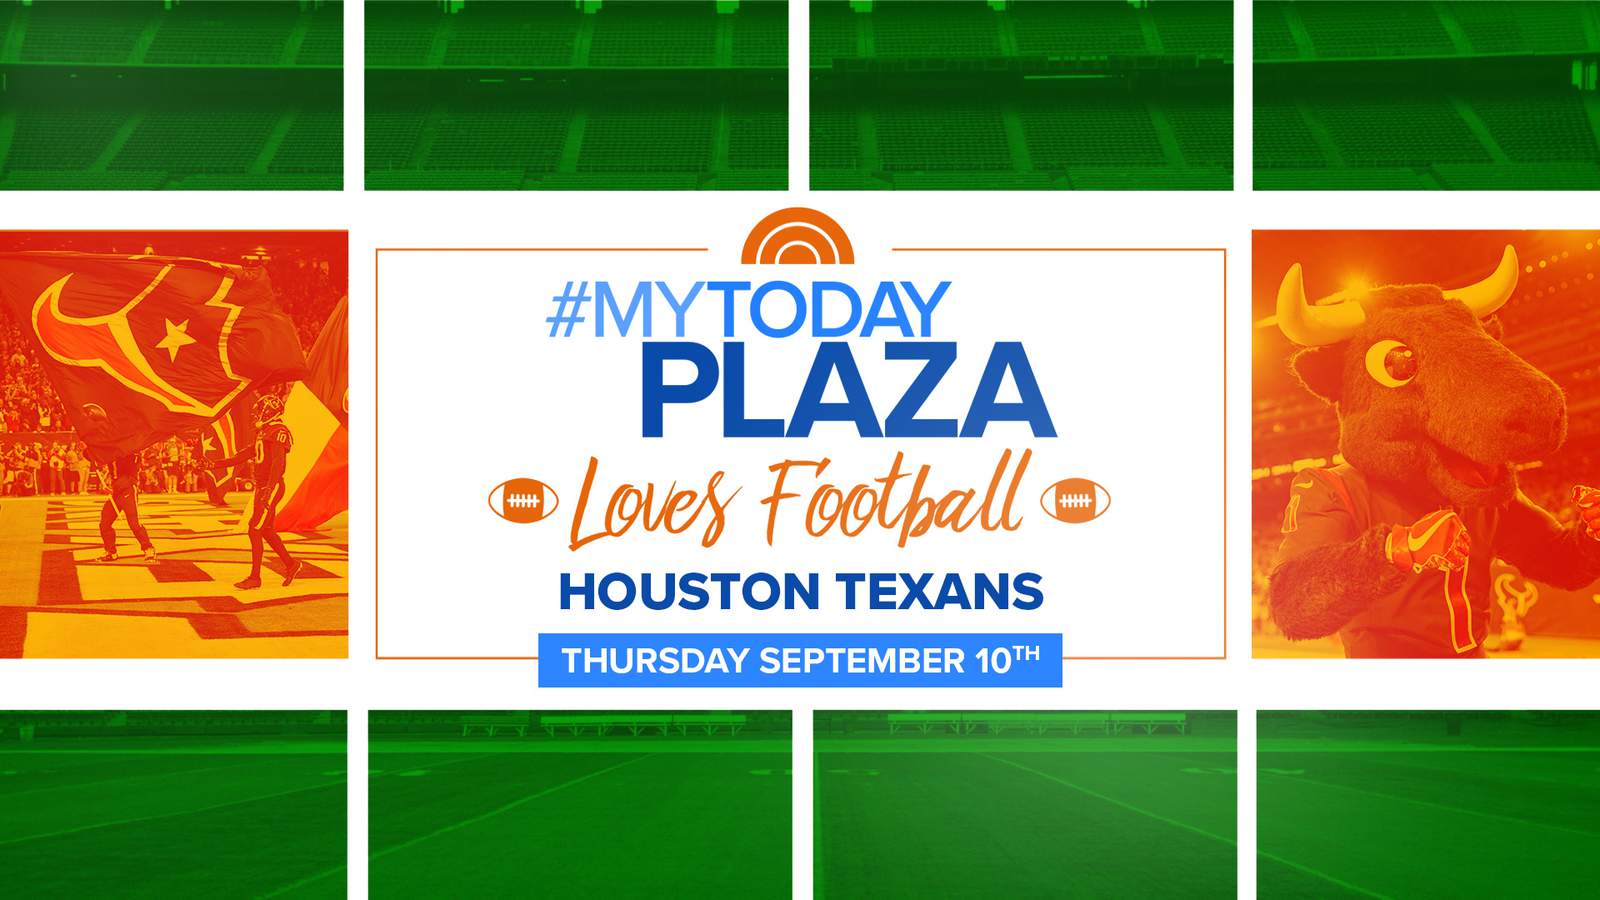 Here’s how to join #MyTODAYPlaza to celebrate NFL Kickoff between the Texans, the Chiefs